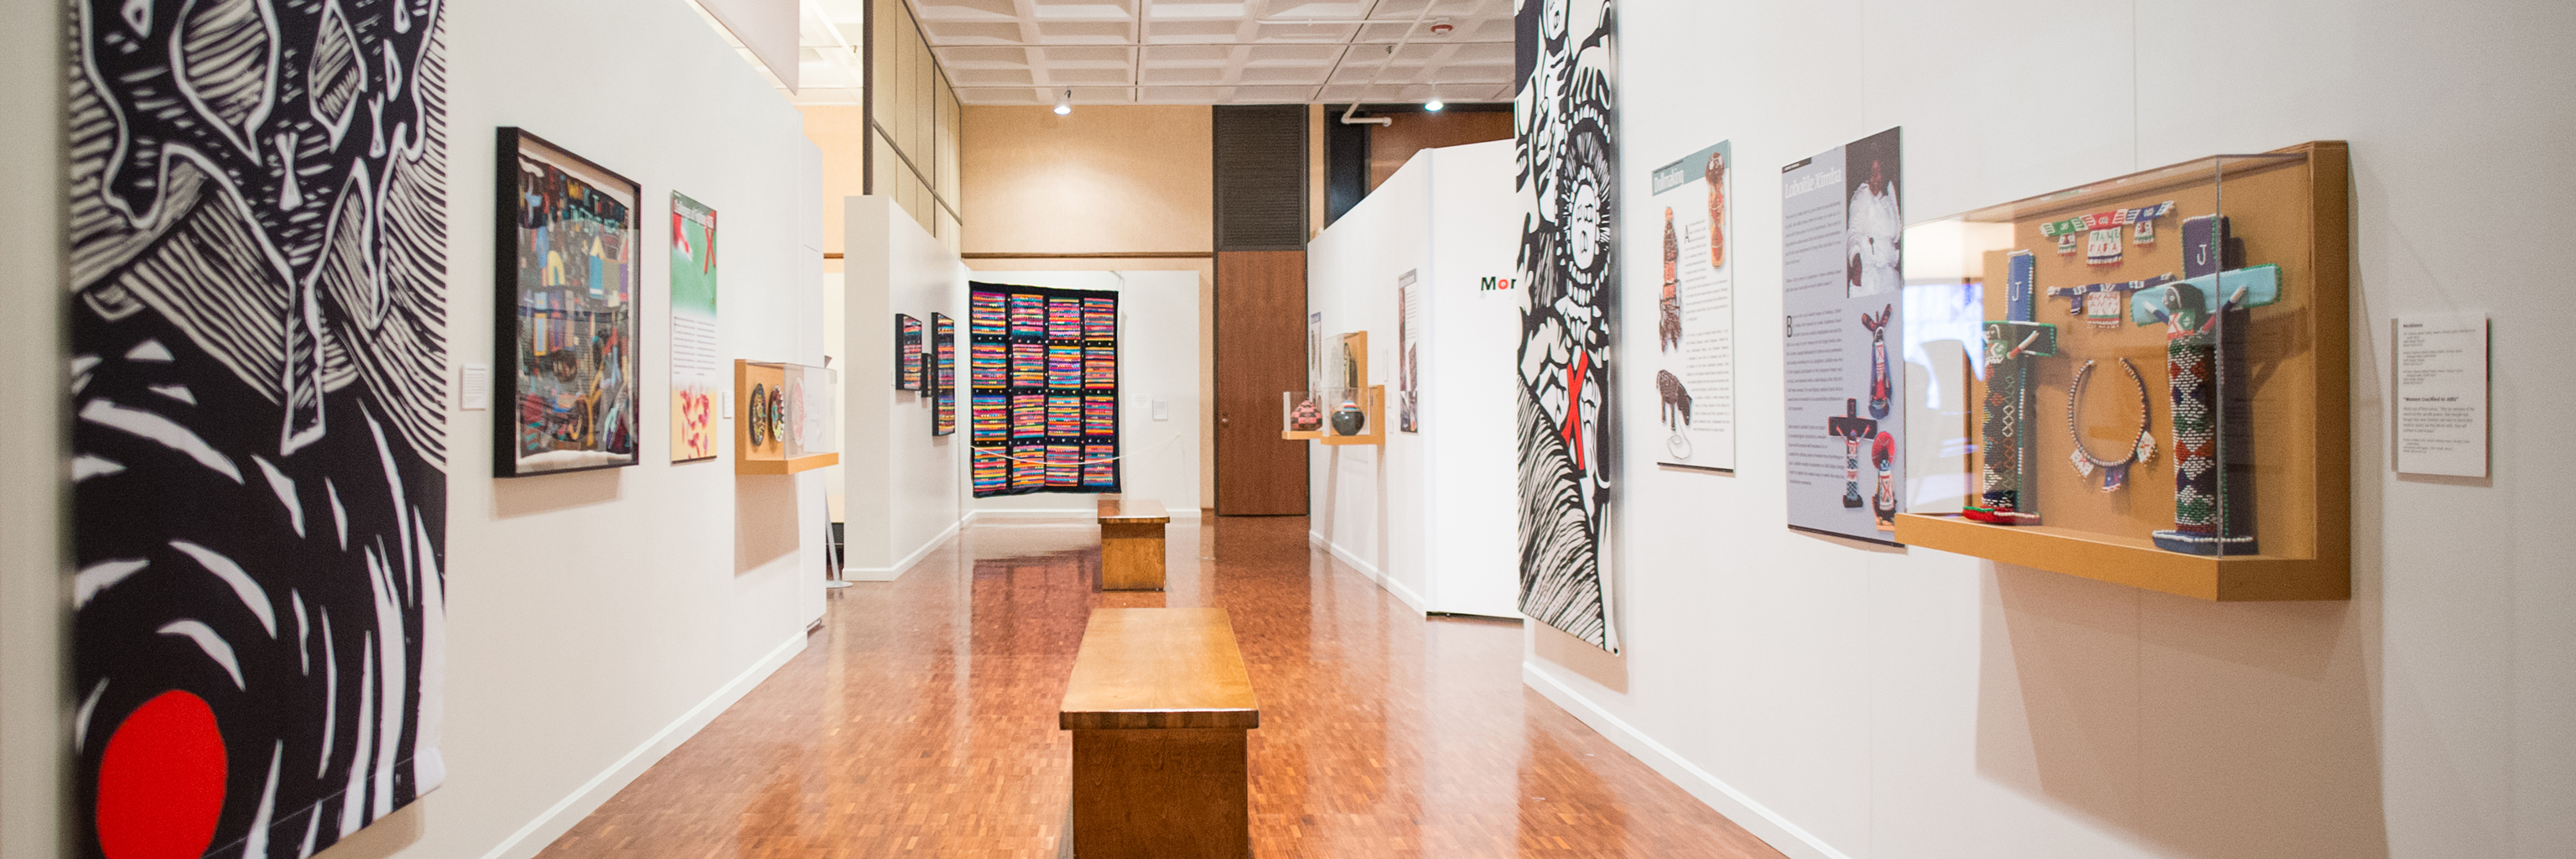 Art on display in the Mathers Museum.